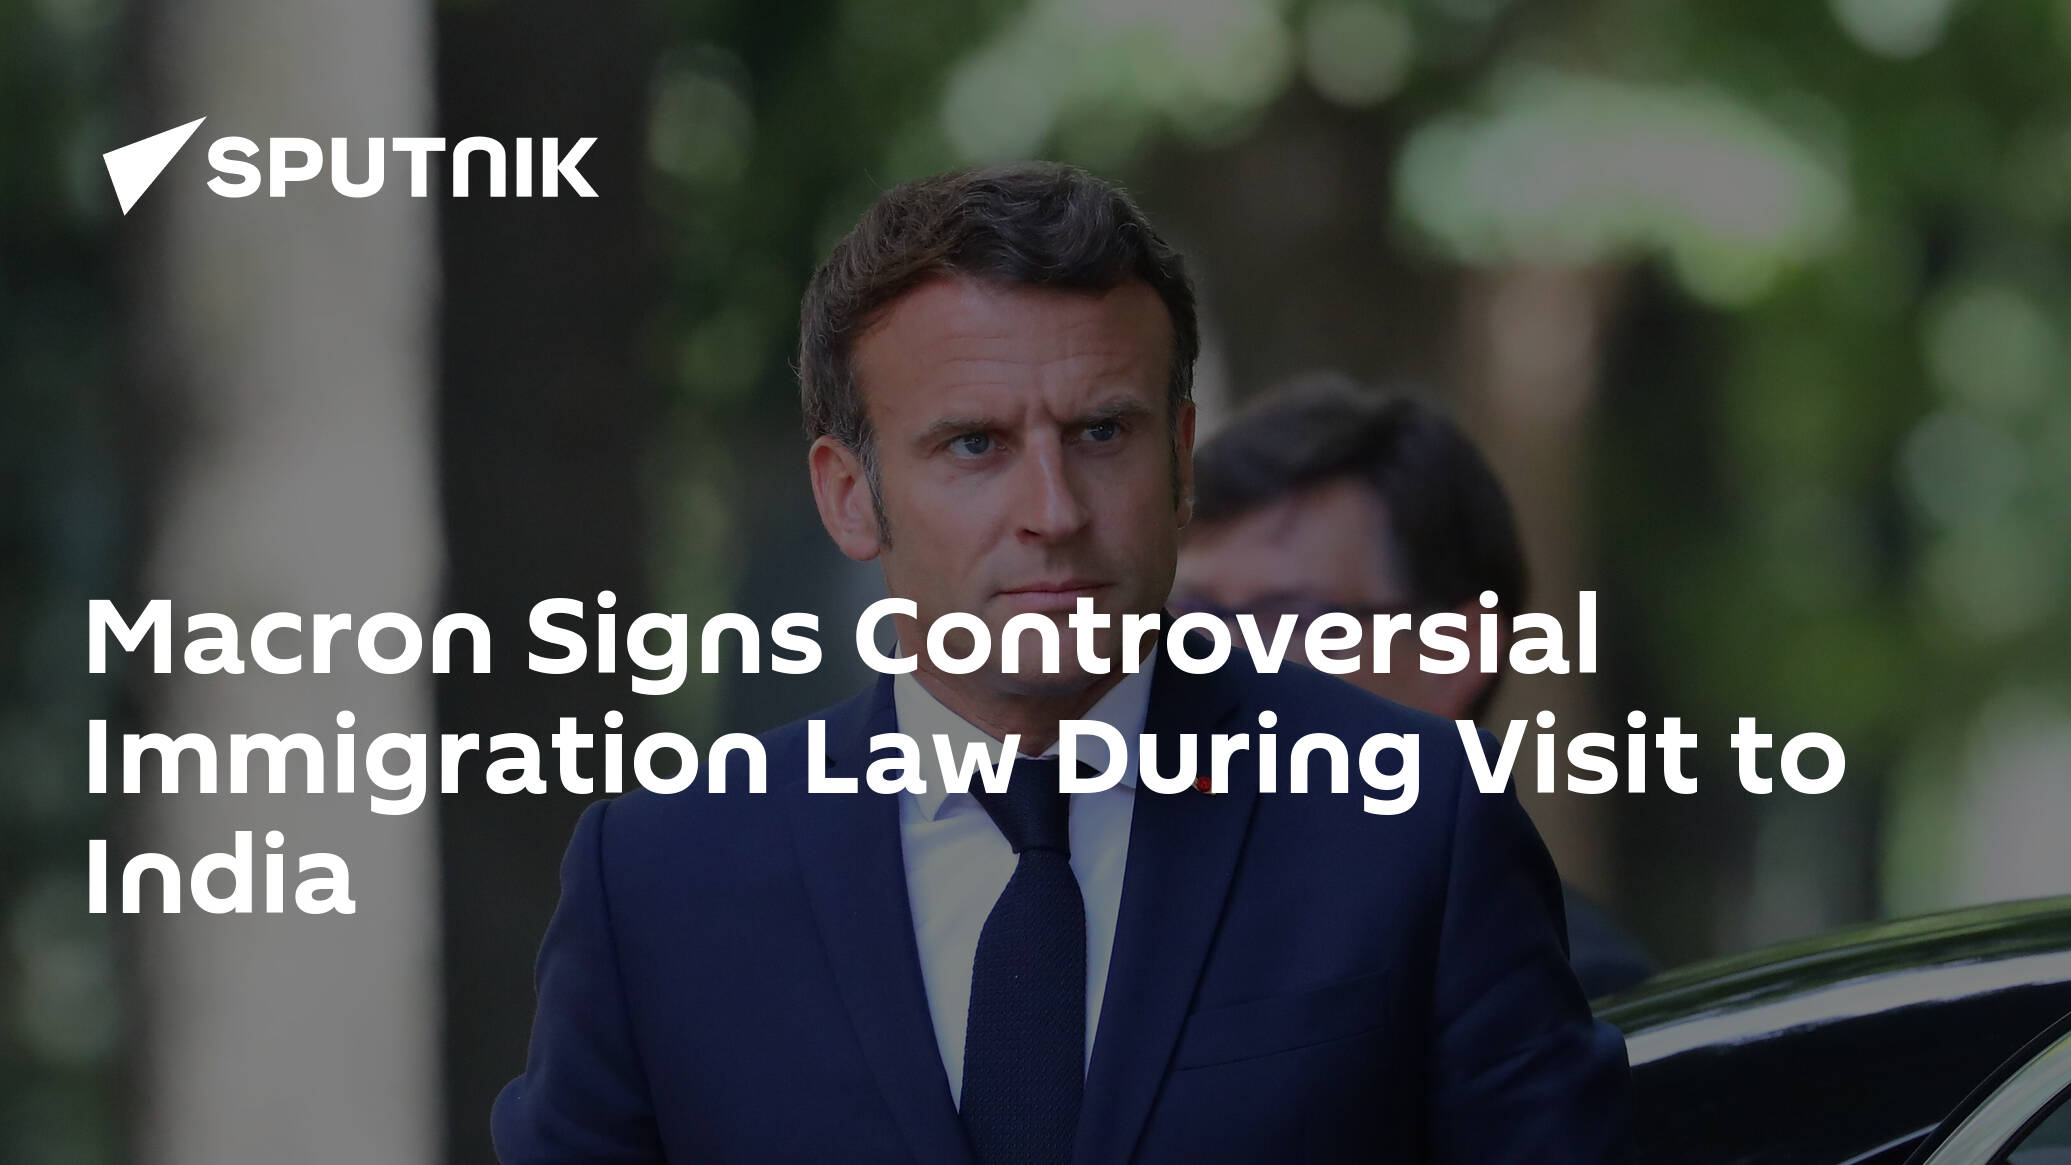 Macron Signs Controversial Immigration Law During Visit to India